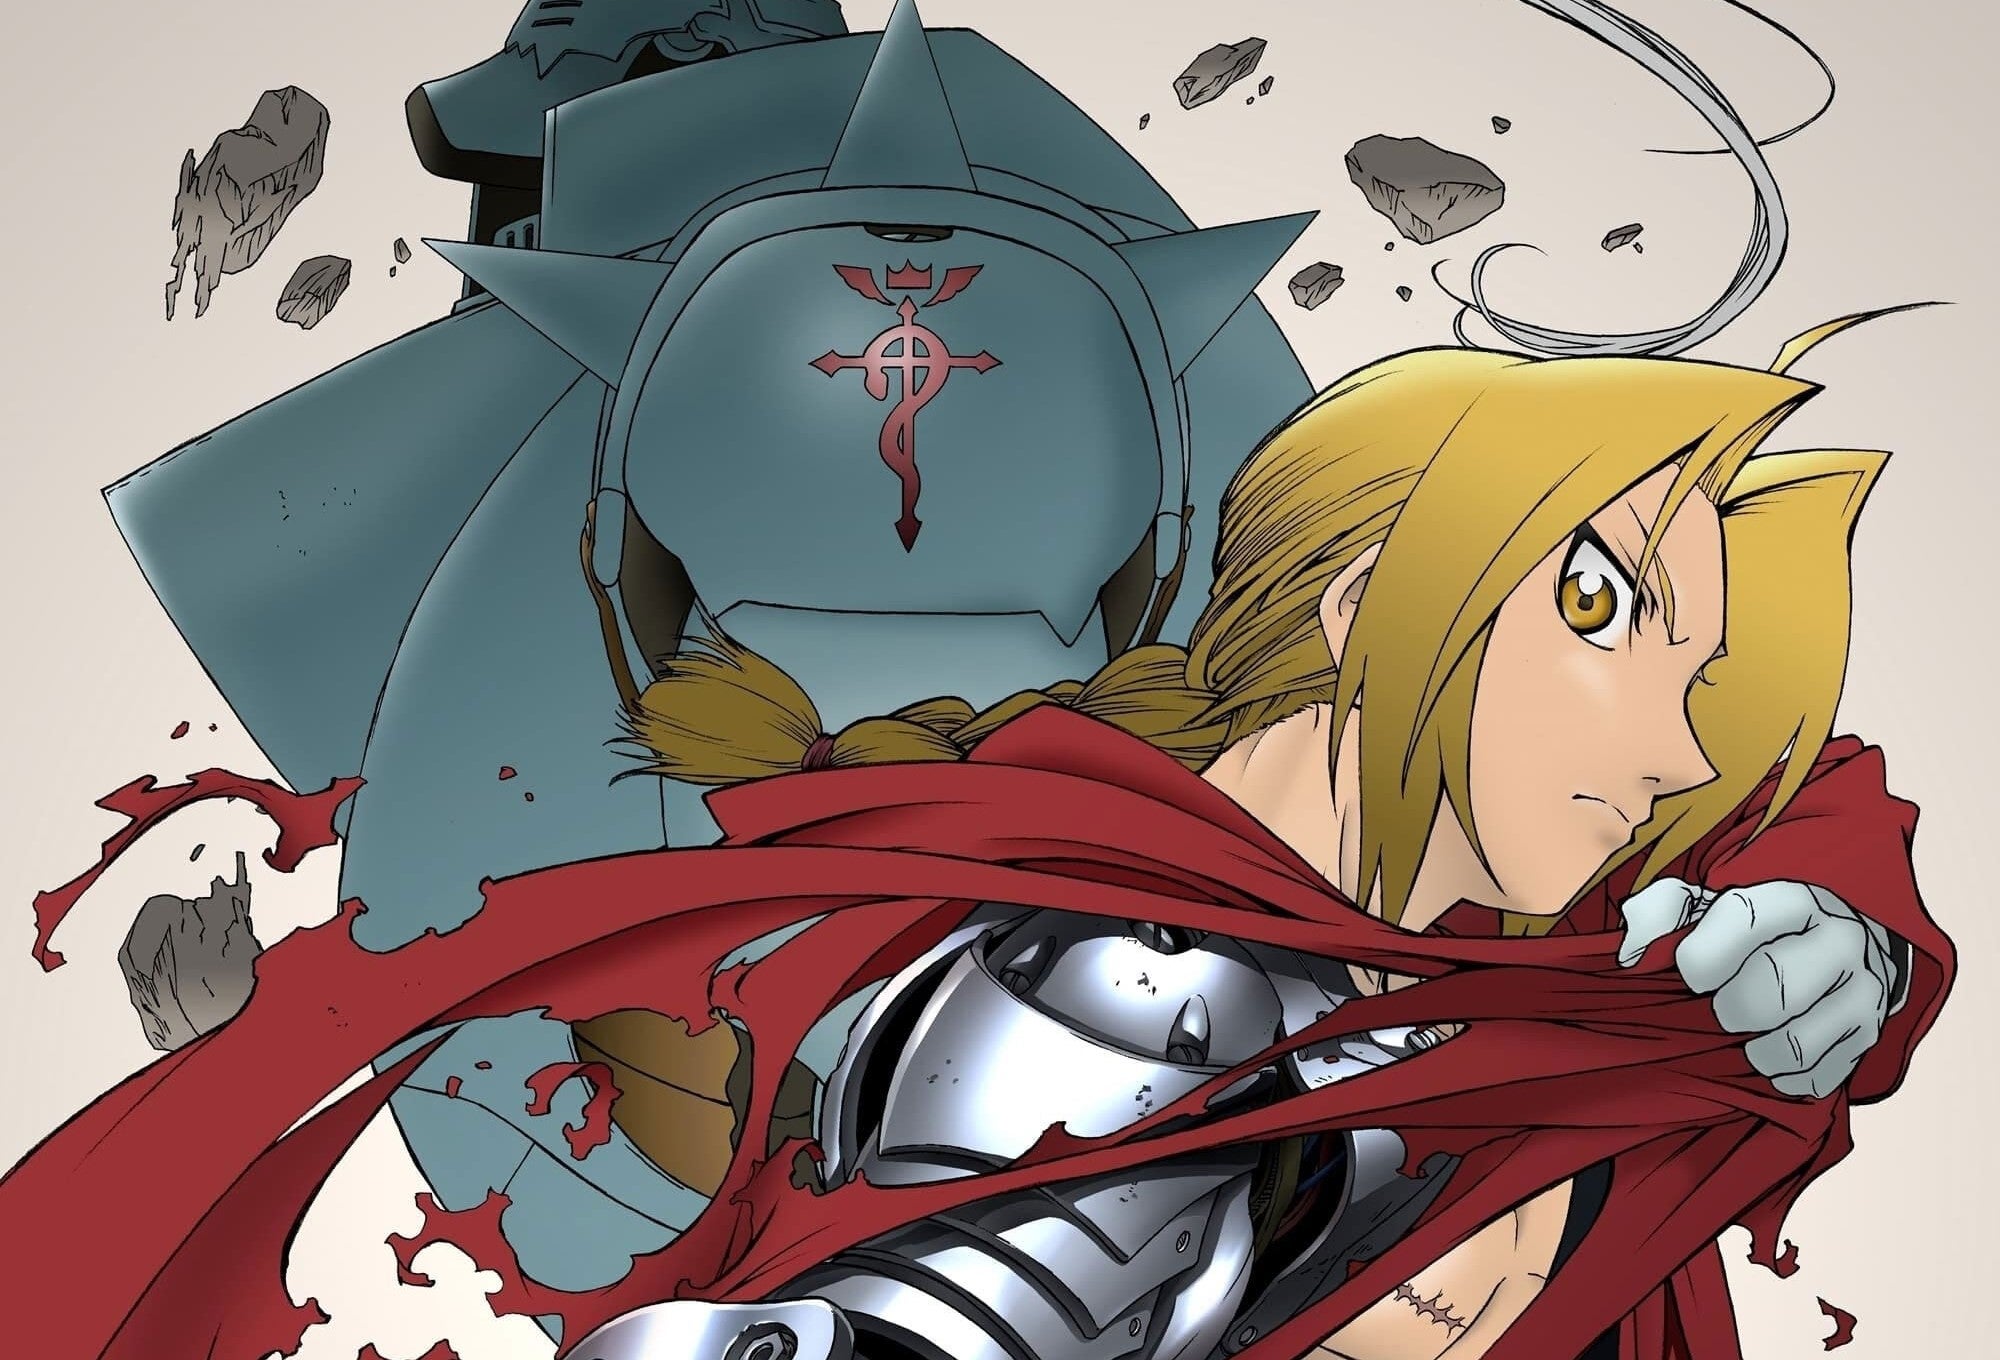 Should I watch Fullmetal Alchemist and Sword Art Online? Which one is  better? - Quora